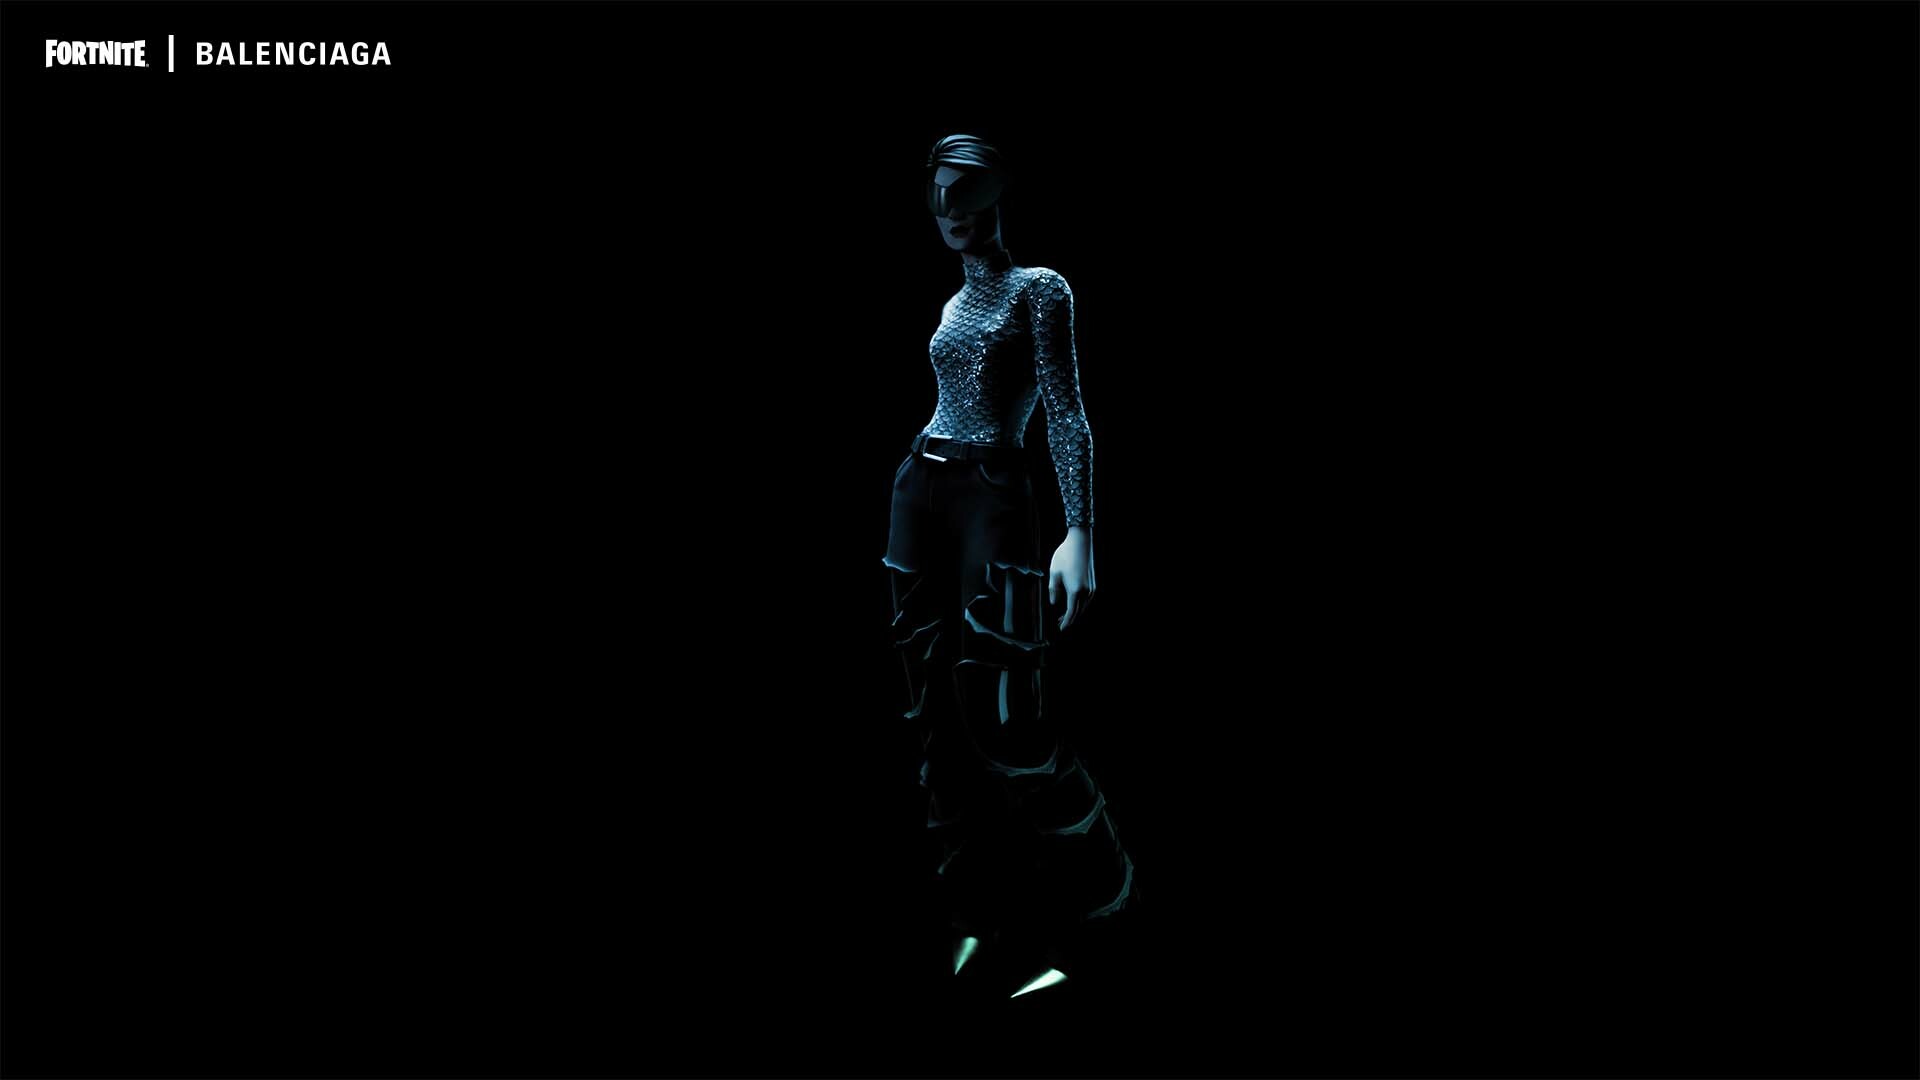 Balenciaga: Collaborated with Epic Games to release a skin line as well as clothes, September 2021. 1920x1080 Full HD Background.